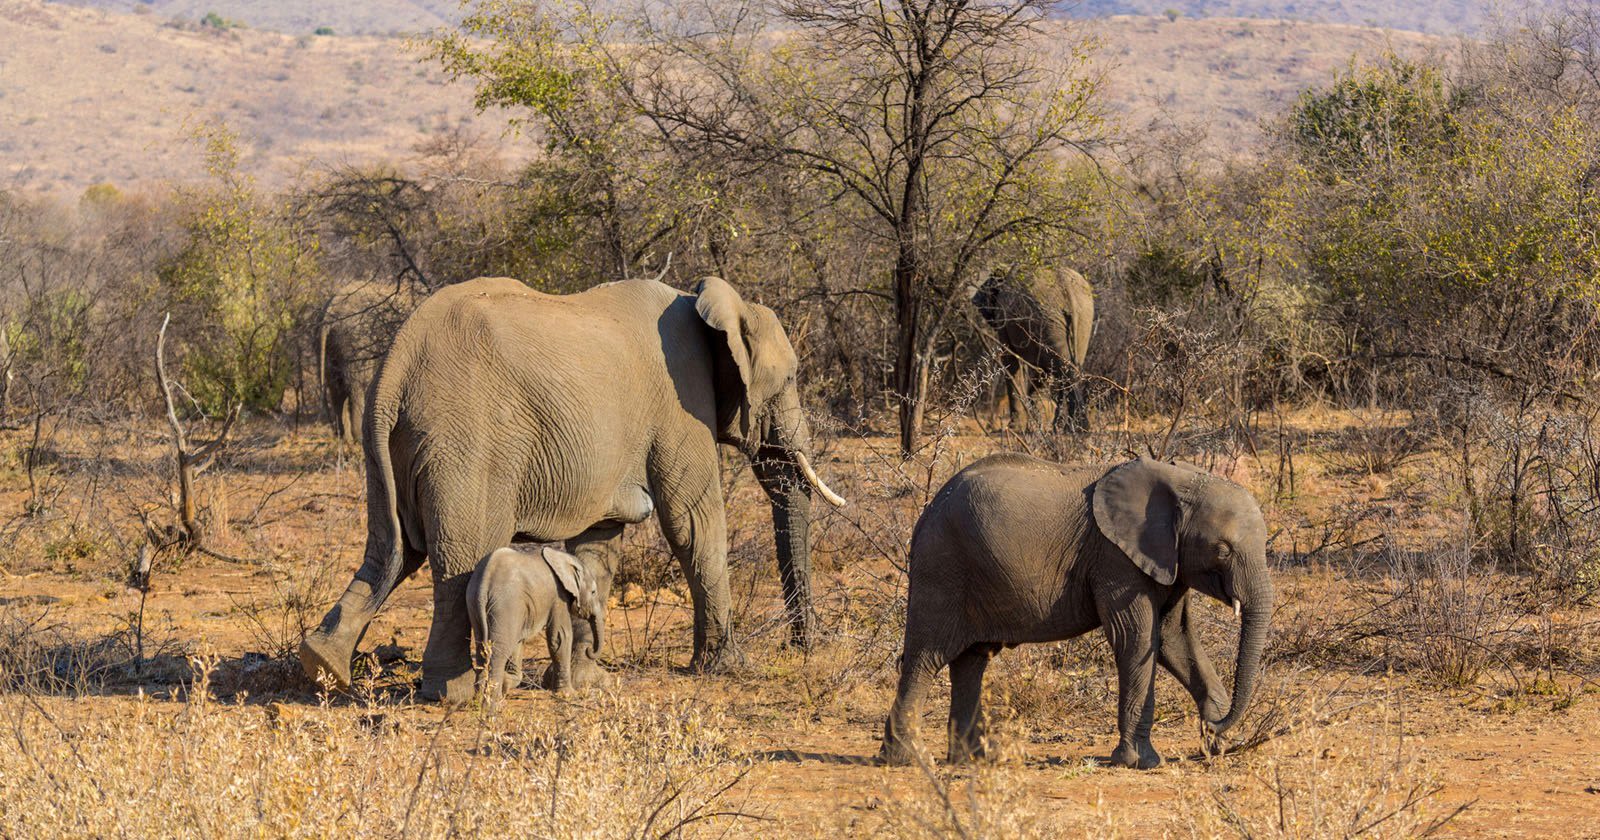 Safari Tourist Leaves Safety of Vehicle for Photo, Killed by Elephants